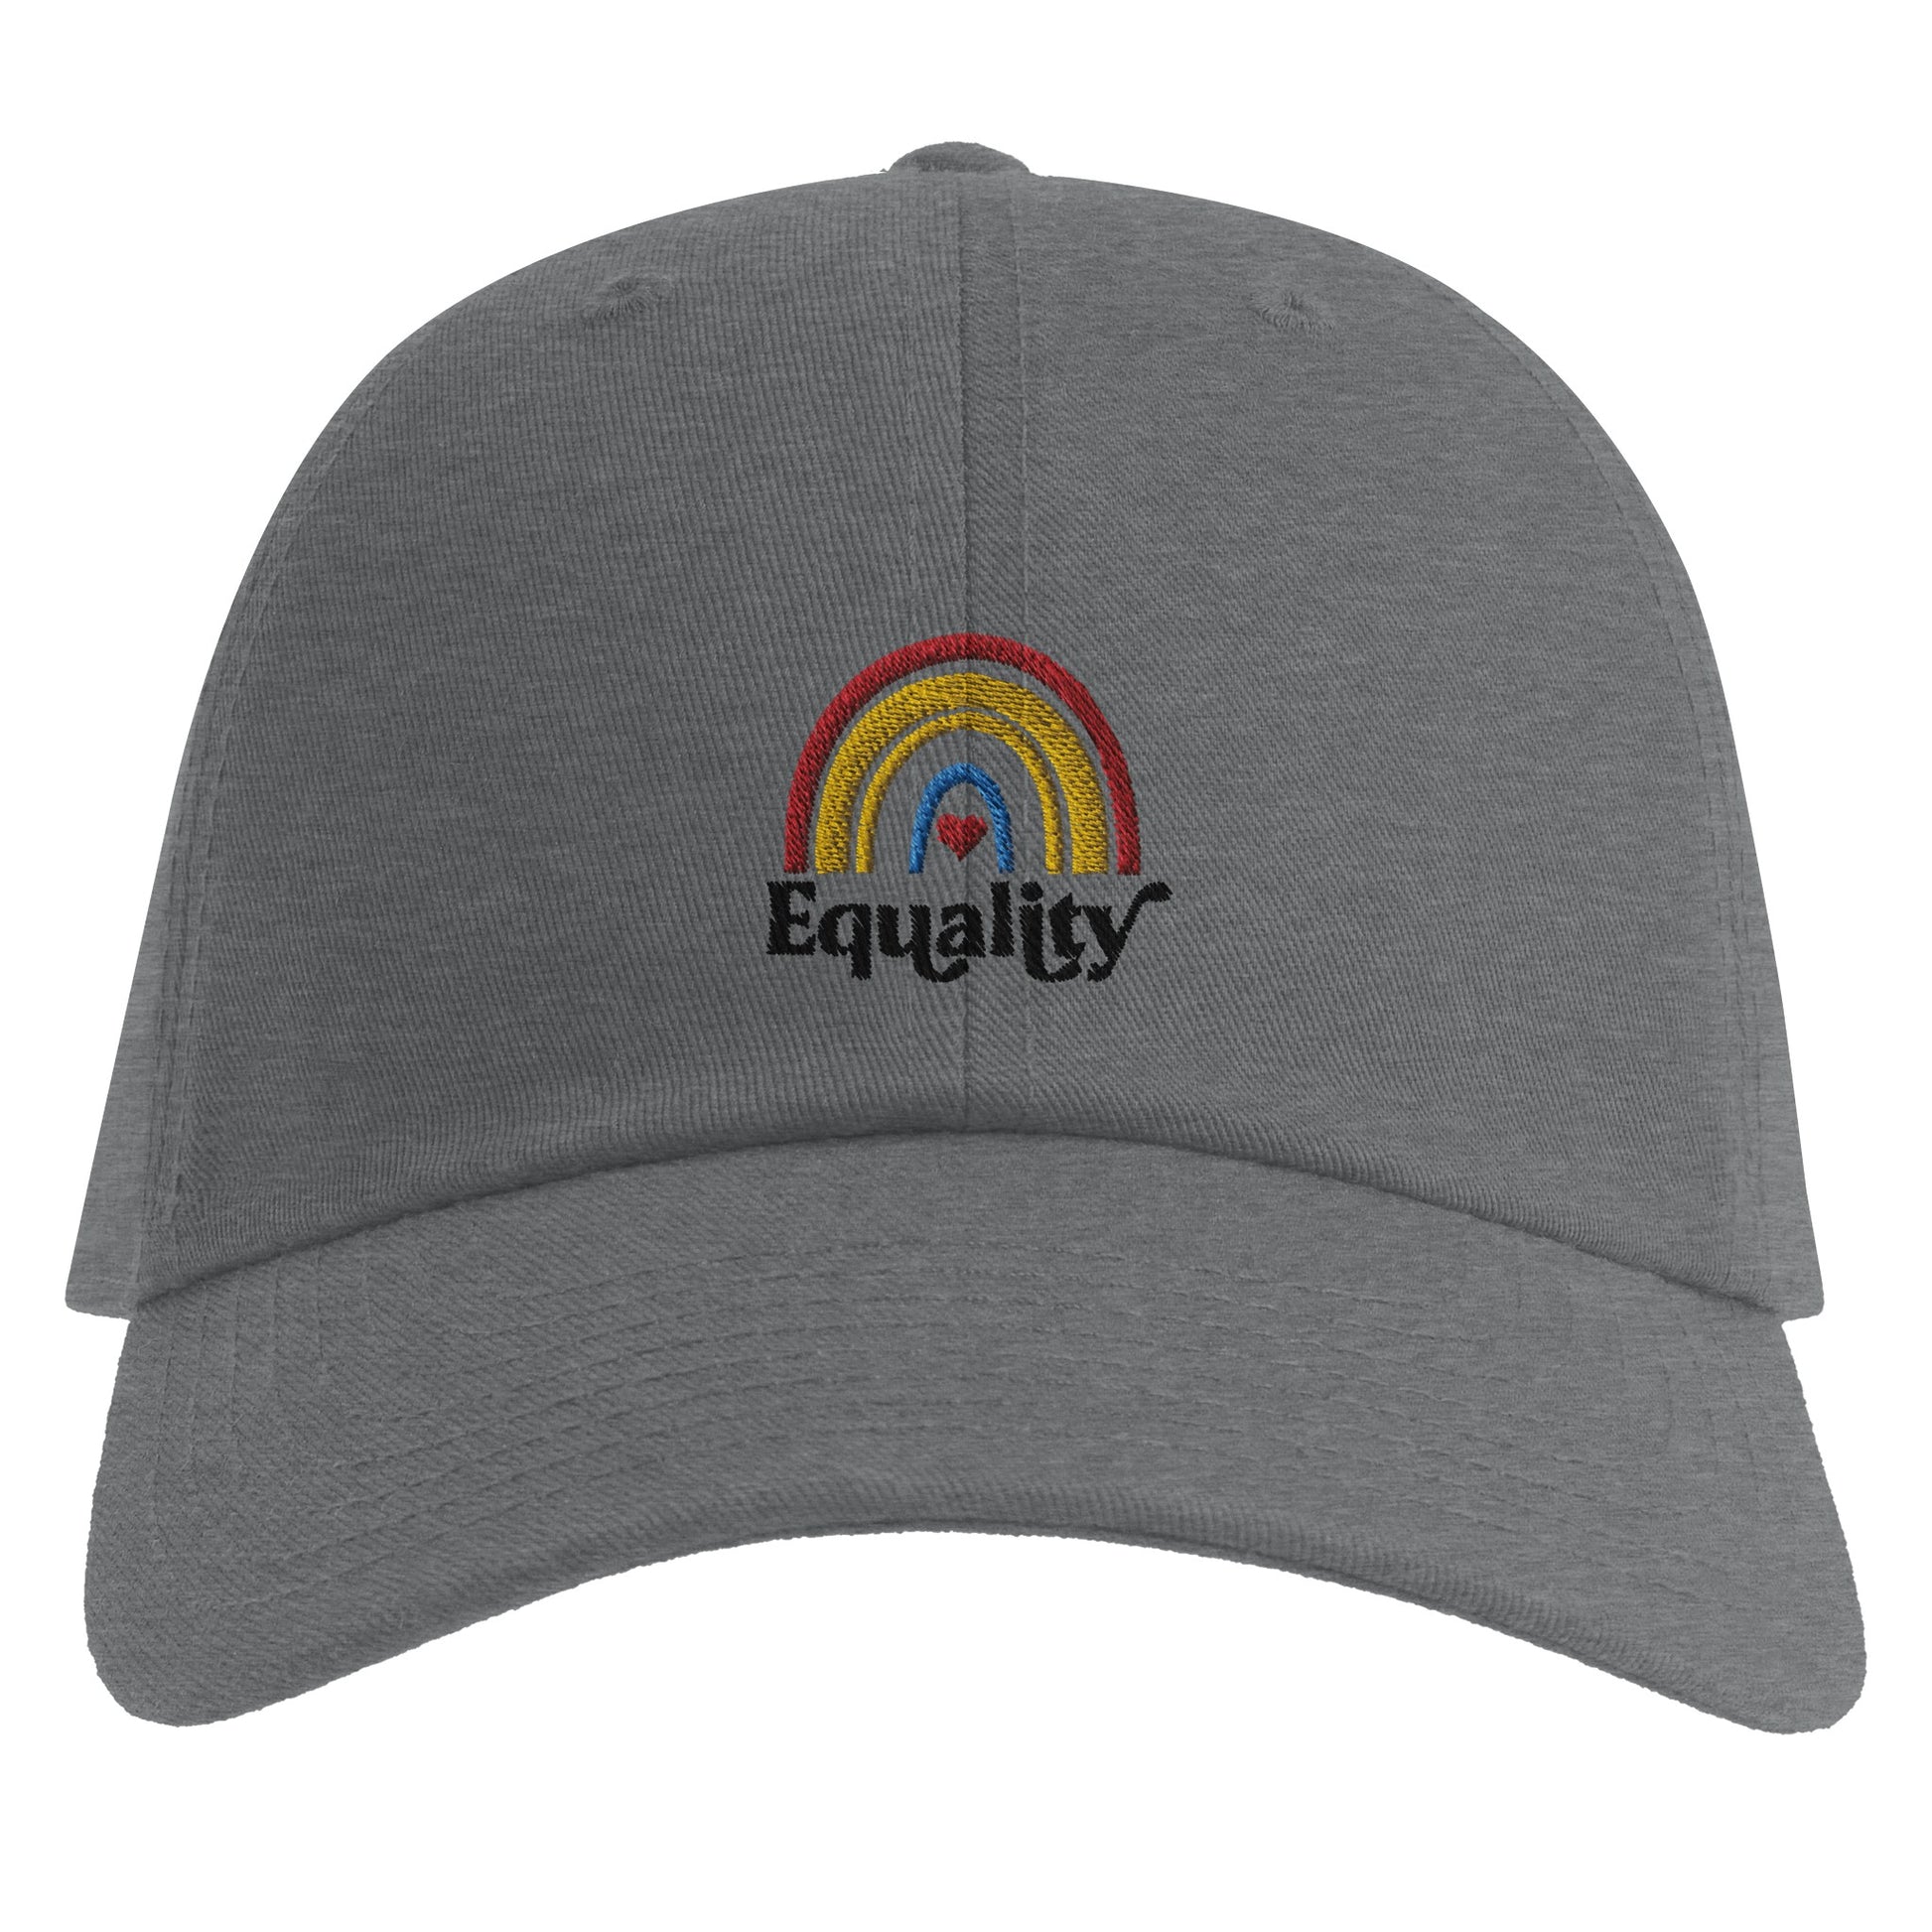 Equality Embroidered Classic Premium Snapback Cap | Yupoong 5789M